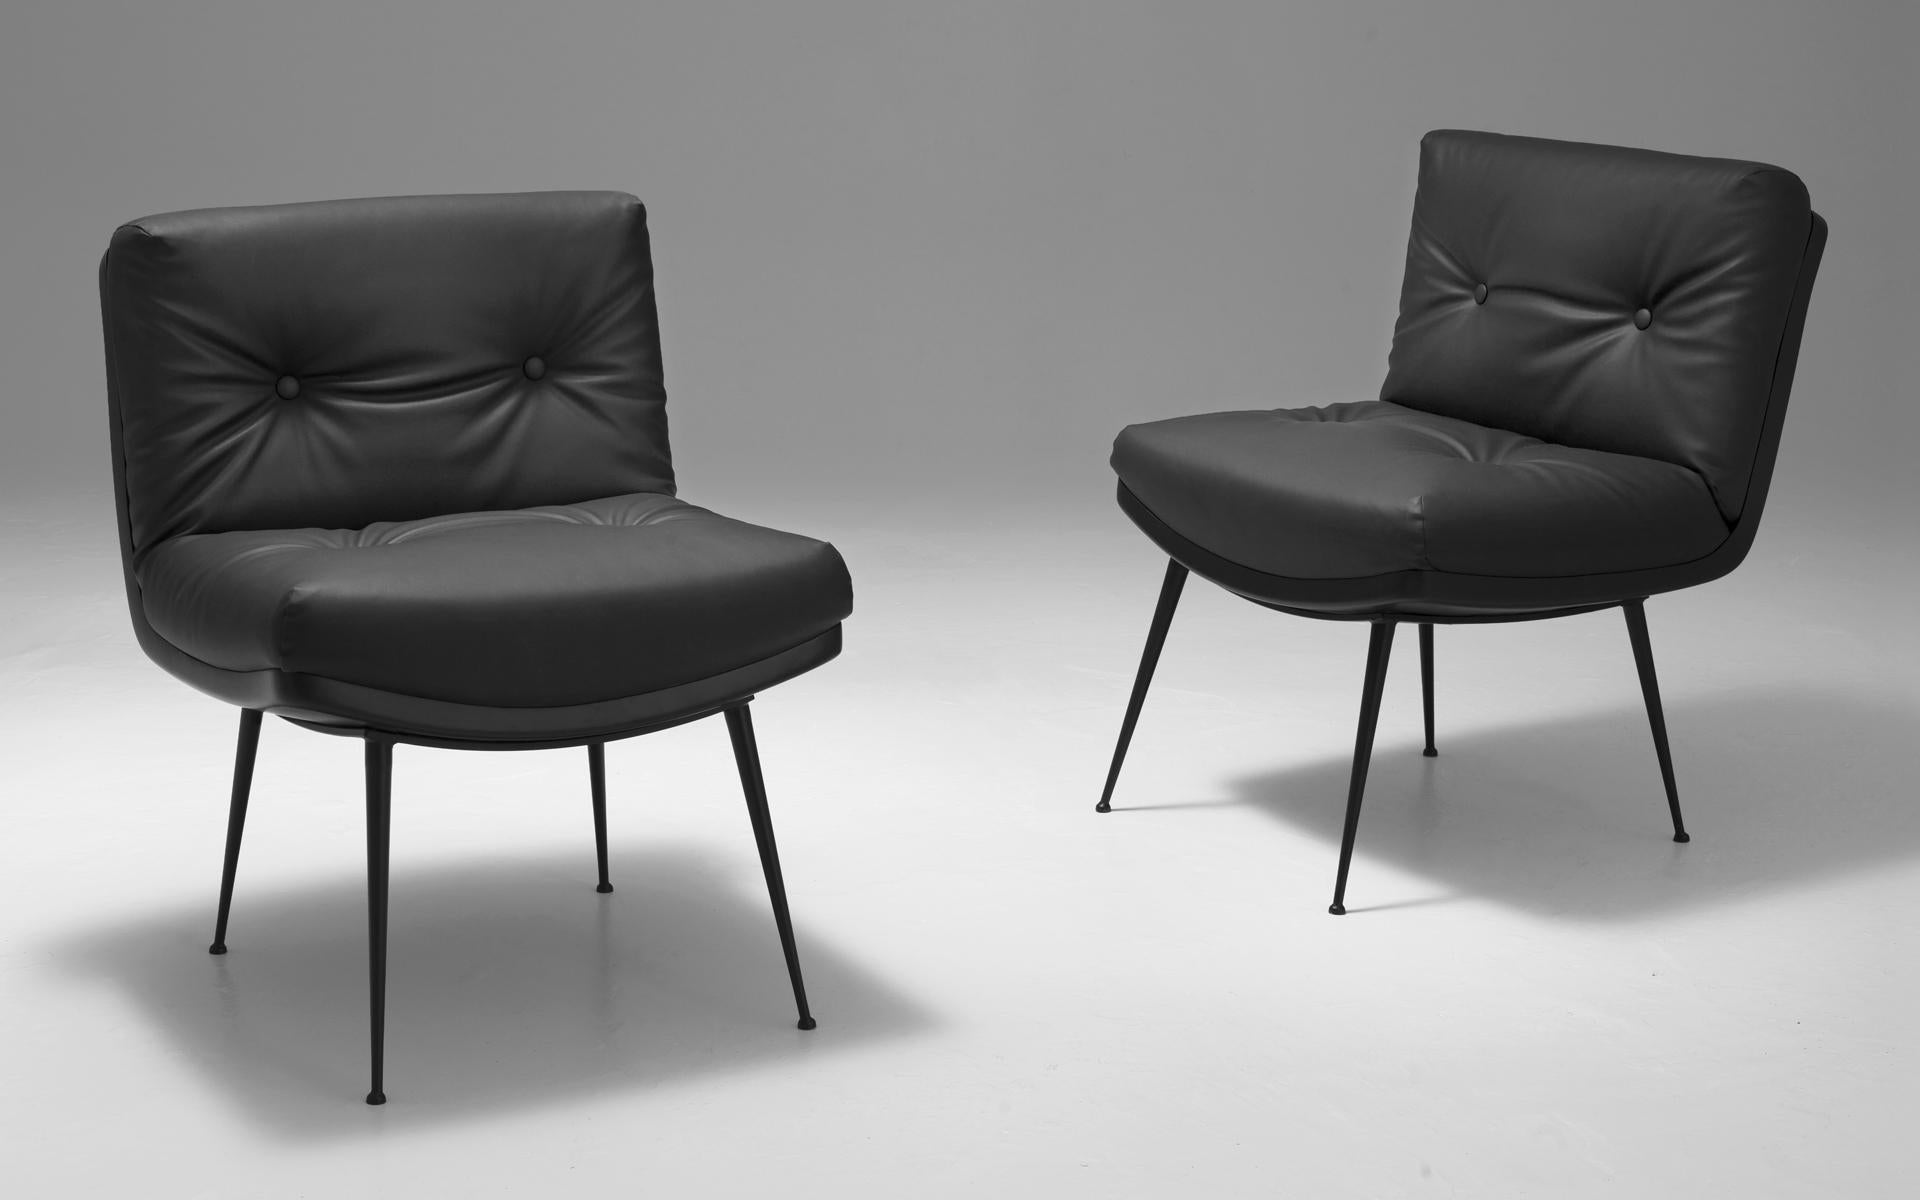 Pair of Chris chair by Imperfettolab
Dimensions: 70 x 60 x H 84 cm
Materials: Fibreglass, Leatherette

Imperfetto Lab
Who we are? We are a family.
Verter Turroni, Emanuela Ravelli and our children Elia, Margherita and Eusebio.
All together,